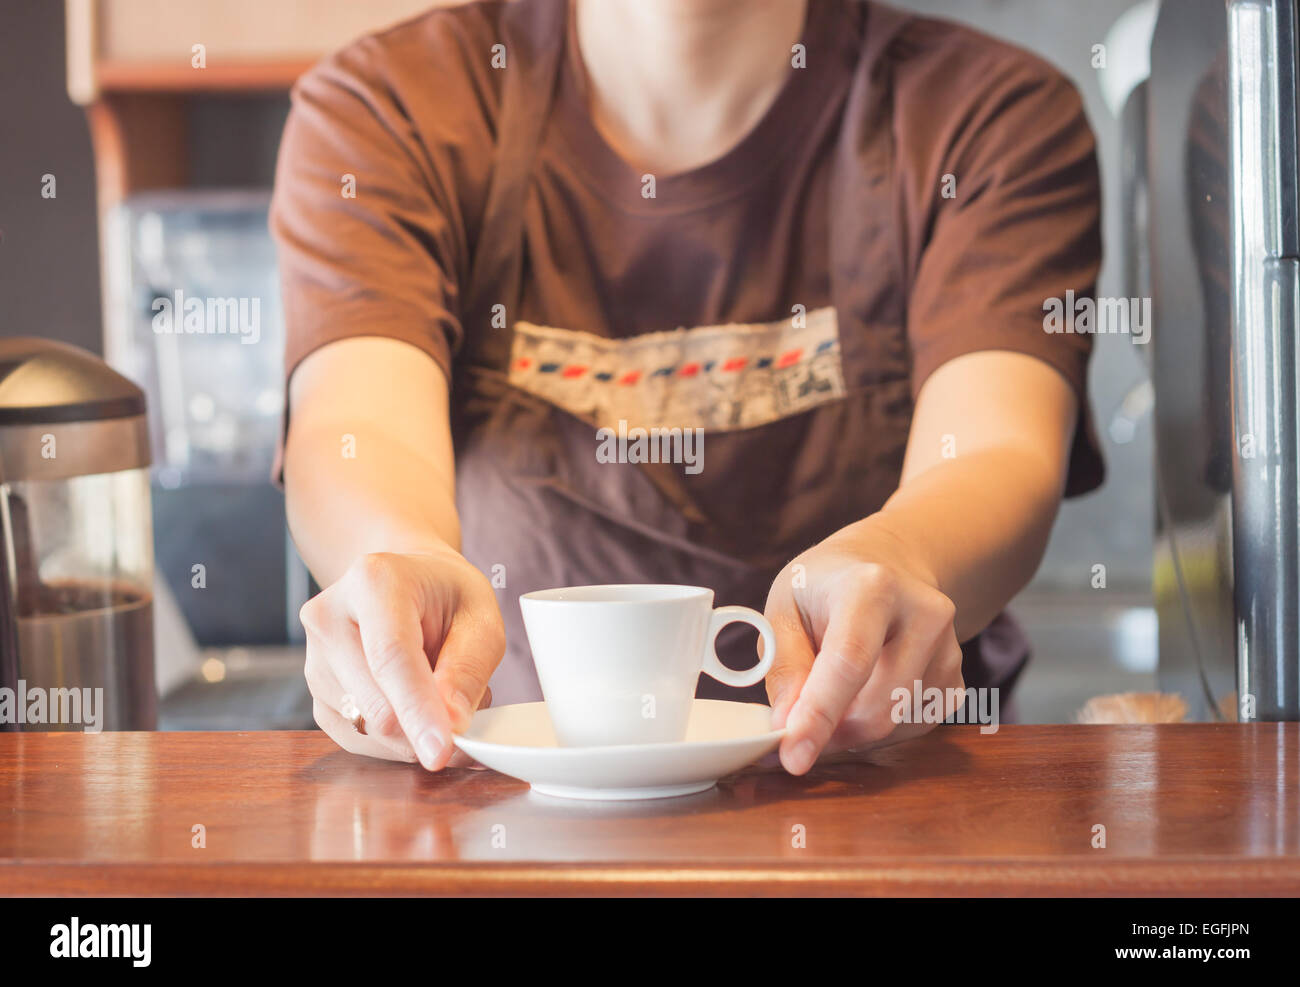 Barista offering mini white cup of coffee, stock photo Stock Photo